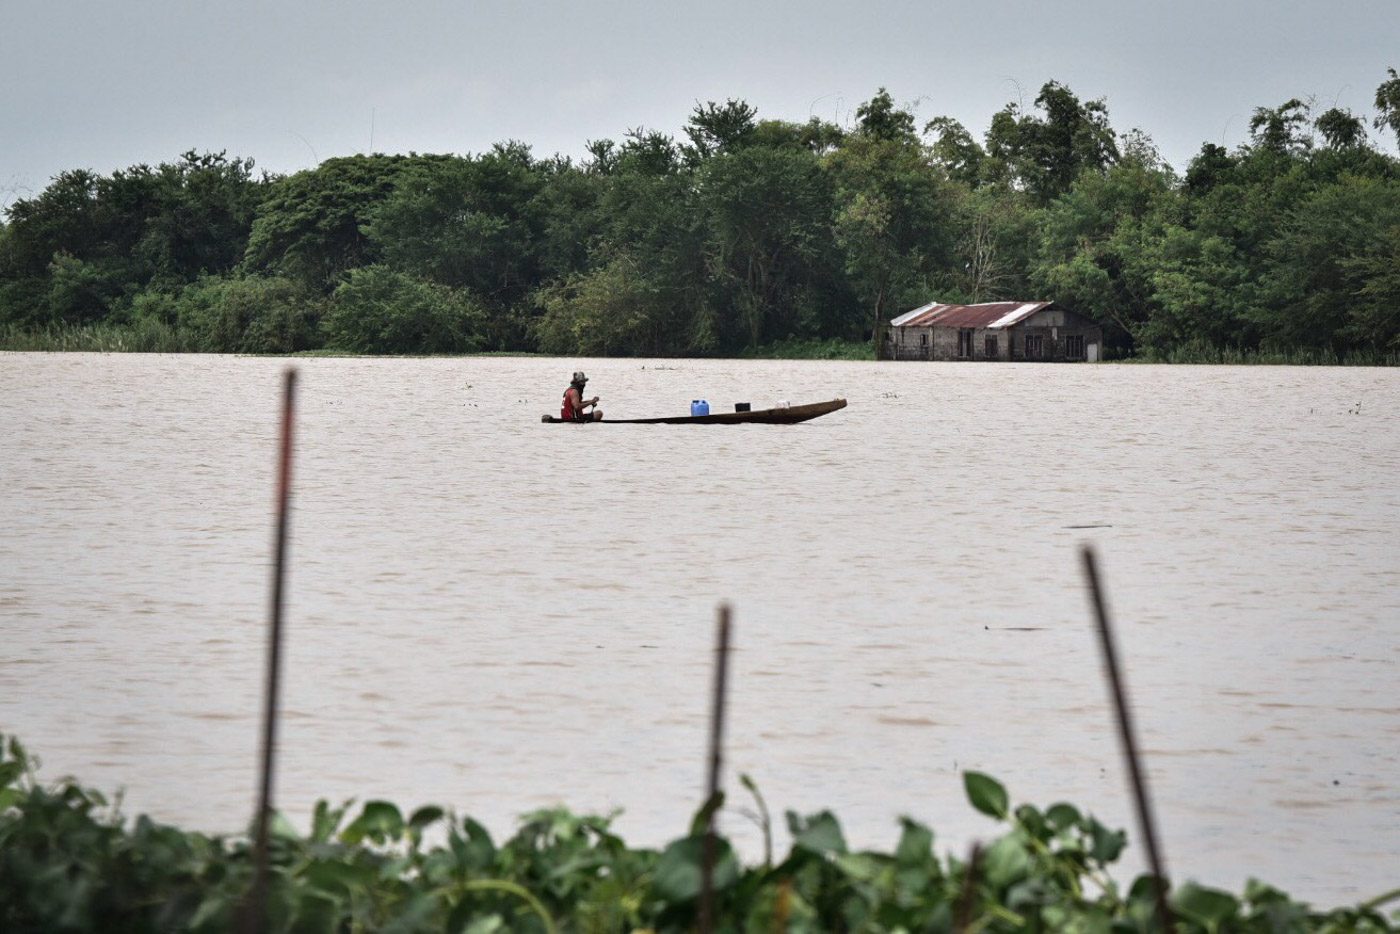 IN PHOTOS: Tarlac rice fields turn into a lake